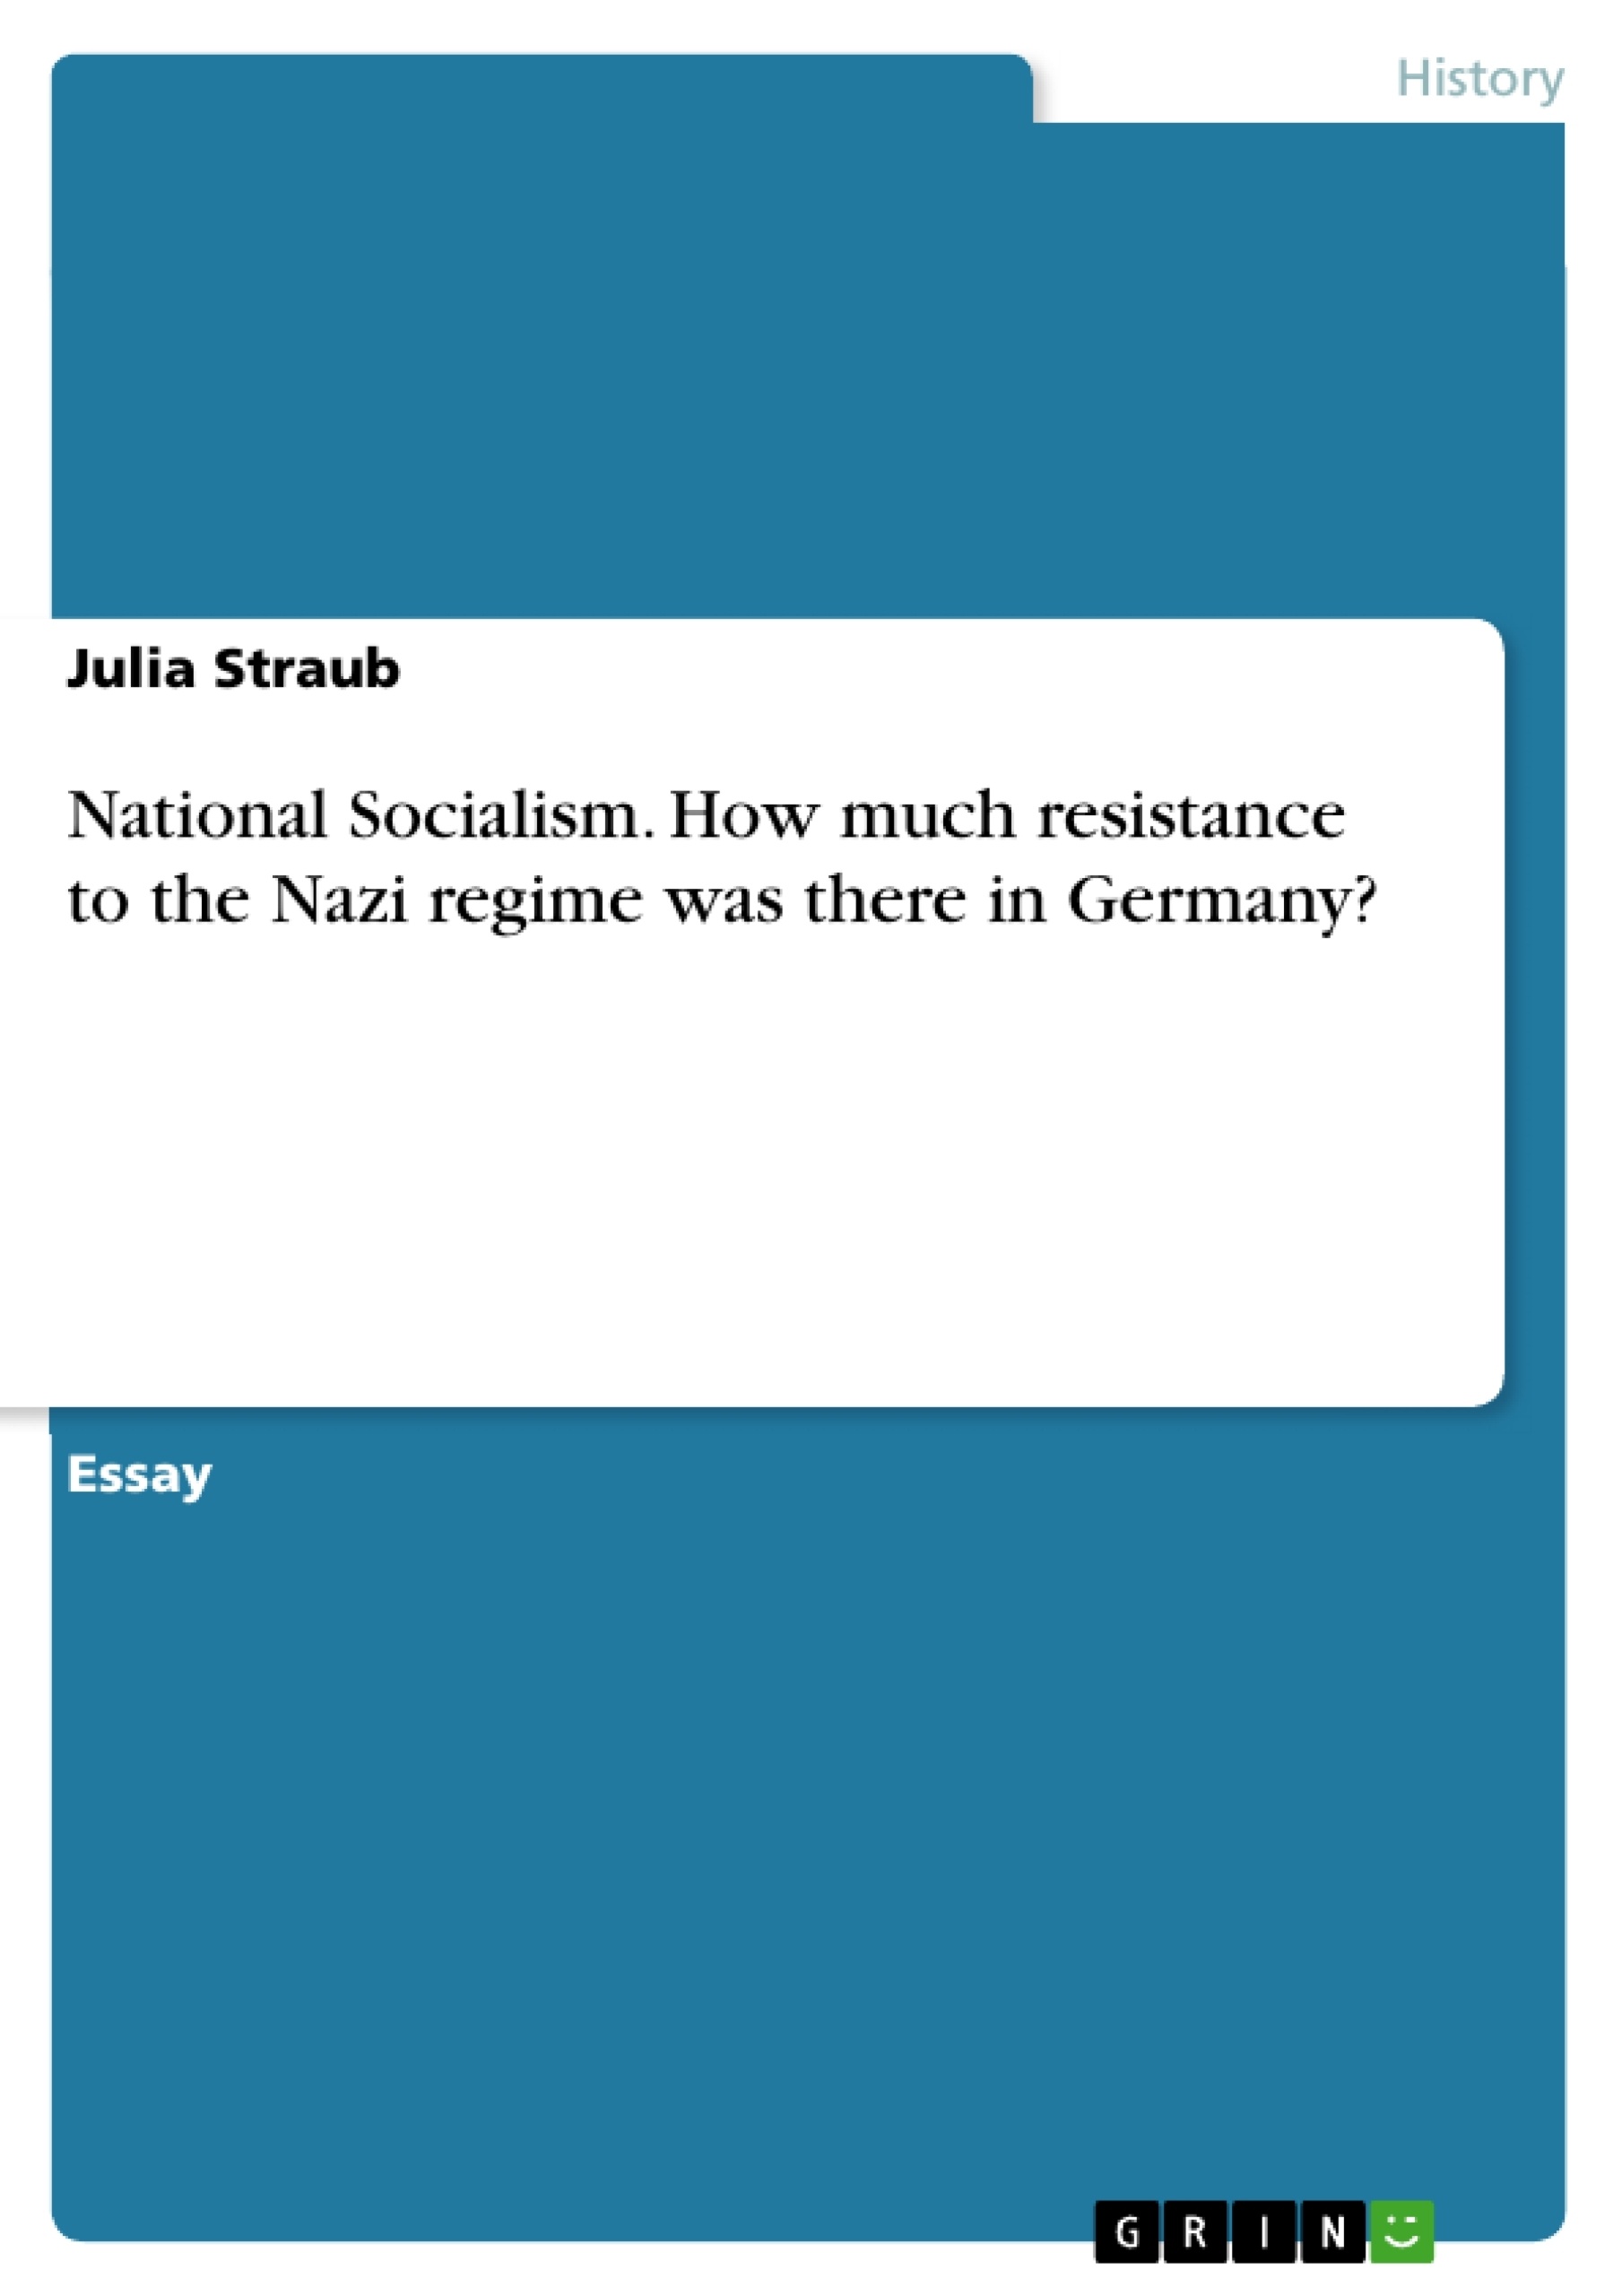 Título: National Socialism. How much resistance to the Nazi regime was there in Germany?